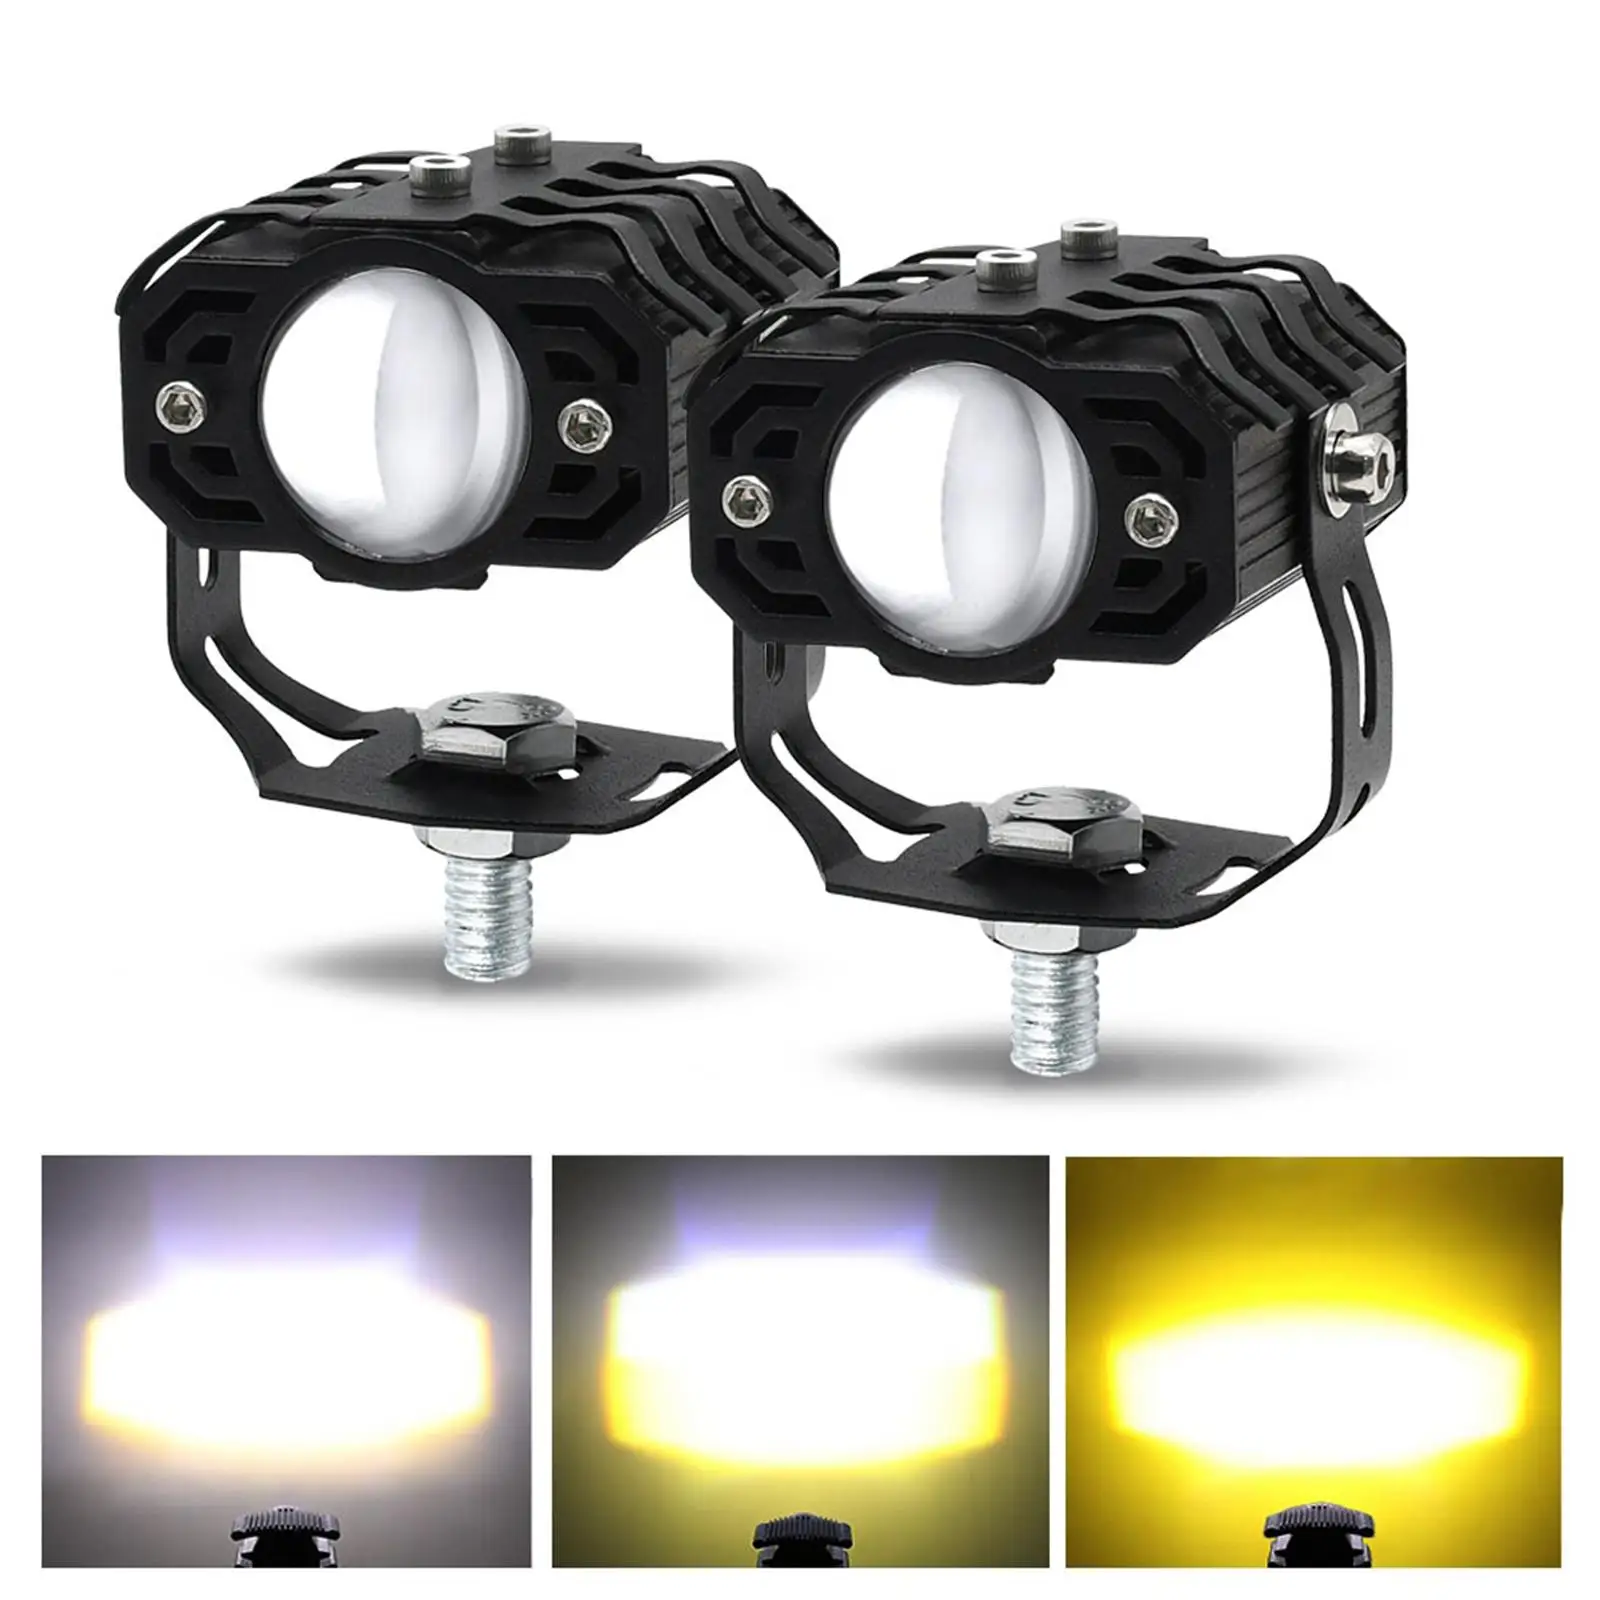 2x Motorcycle Auxiliary Driving Lights Spotlight Fog Light for SUV Car